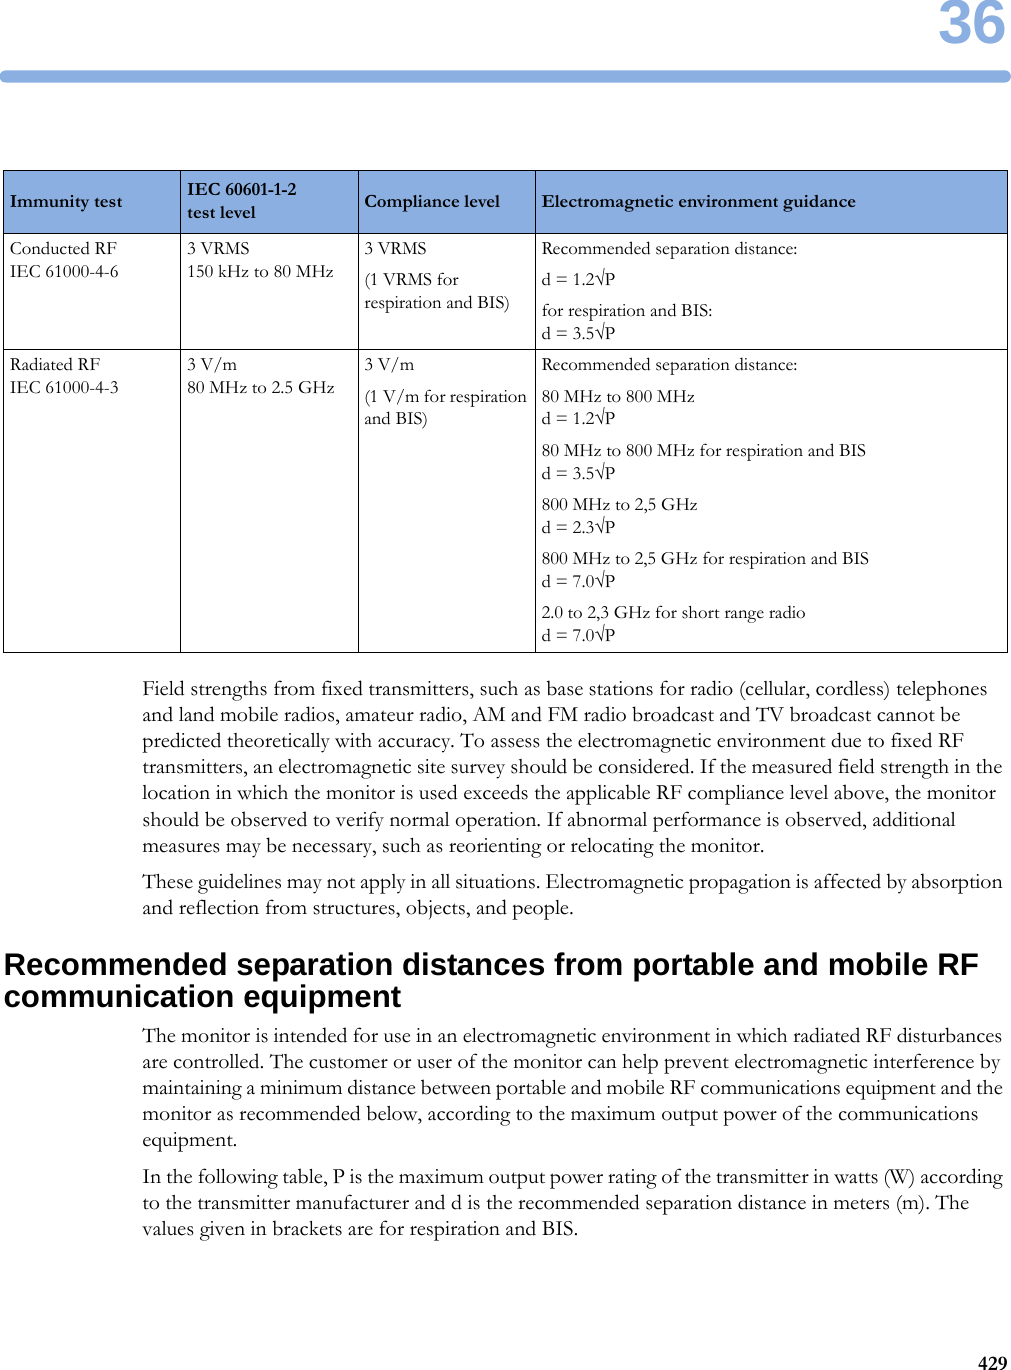 36429Field strengths from fixed transmitters, such as base stations for radio (cellular, cordless) telephones and land mobile radios, amateur radio, AM and FM radio broadcast and TV broadcast cannot be predicted theoretically with accuracy. To assess the electromagnetic environment due to fixed RF transmitters, an electromagnetic site survey should be considered. If the measured field strength in the location in which the monitor is used exceeds the applicable RF compliance level above, the monitor should be observed to verify normal operation. If abnormal performance is observed, additional measures may be necessary, such as reorienting or relocating the monitor.These guidelines may not apply in all situations. Electromagnetic propagation is affected by absorption and reflection from structures, objects, and people.Recommended separation distances from portable and mobile RF communication equipmentThe monitor is intended for use in an electromagnetic environment in which radiated RF disturbances are controlled. The customer or user of the monitor can help prevent electromagnetic interference by maintaining a minimum distance between portable and mobile RF communications equipment and the monitor as recommended below, according to the maximum output power of the communications equipment.In the following table, P is the maximum output power rating of the transmitter in watts (W) according to the transmitter manufacturer and d is the recommended separation distance in meters (m). The values given in brackets are for respiration and BIS.Immunity test IEC 60601-1-2 test level Compliance level Electromagnetic environment guidanceConducted RF IEC 61000-4-63VRMS150 kHz to 80 MHz3VRMS(1 VRMS for respiration and BIS)Recommended separation distance:d = 1.2√Pfor respiration and BIS:d = 3.5√PRadiated RFIEC 61000-4-33V/m80 MHz to 2.5 GHz3V/m(1 V/m for respiration and BIS)Recommended separation distance:80 MHz to 800 MHzd = 1.2√P80 MHz to 800 MHz for respiration and BISd = 3.5√P800 MHz to 2,5 GHzd = 2.3√P800 MHz to 2,5 GHz for respiration and BISd = 7.0√P2.0 to 2,3 GHz for short range radiod = 7.0√P